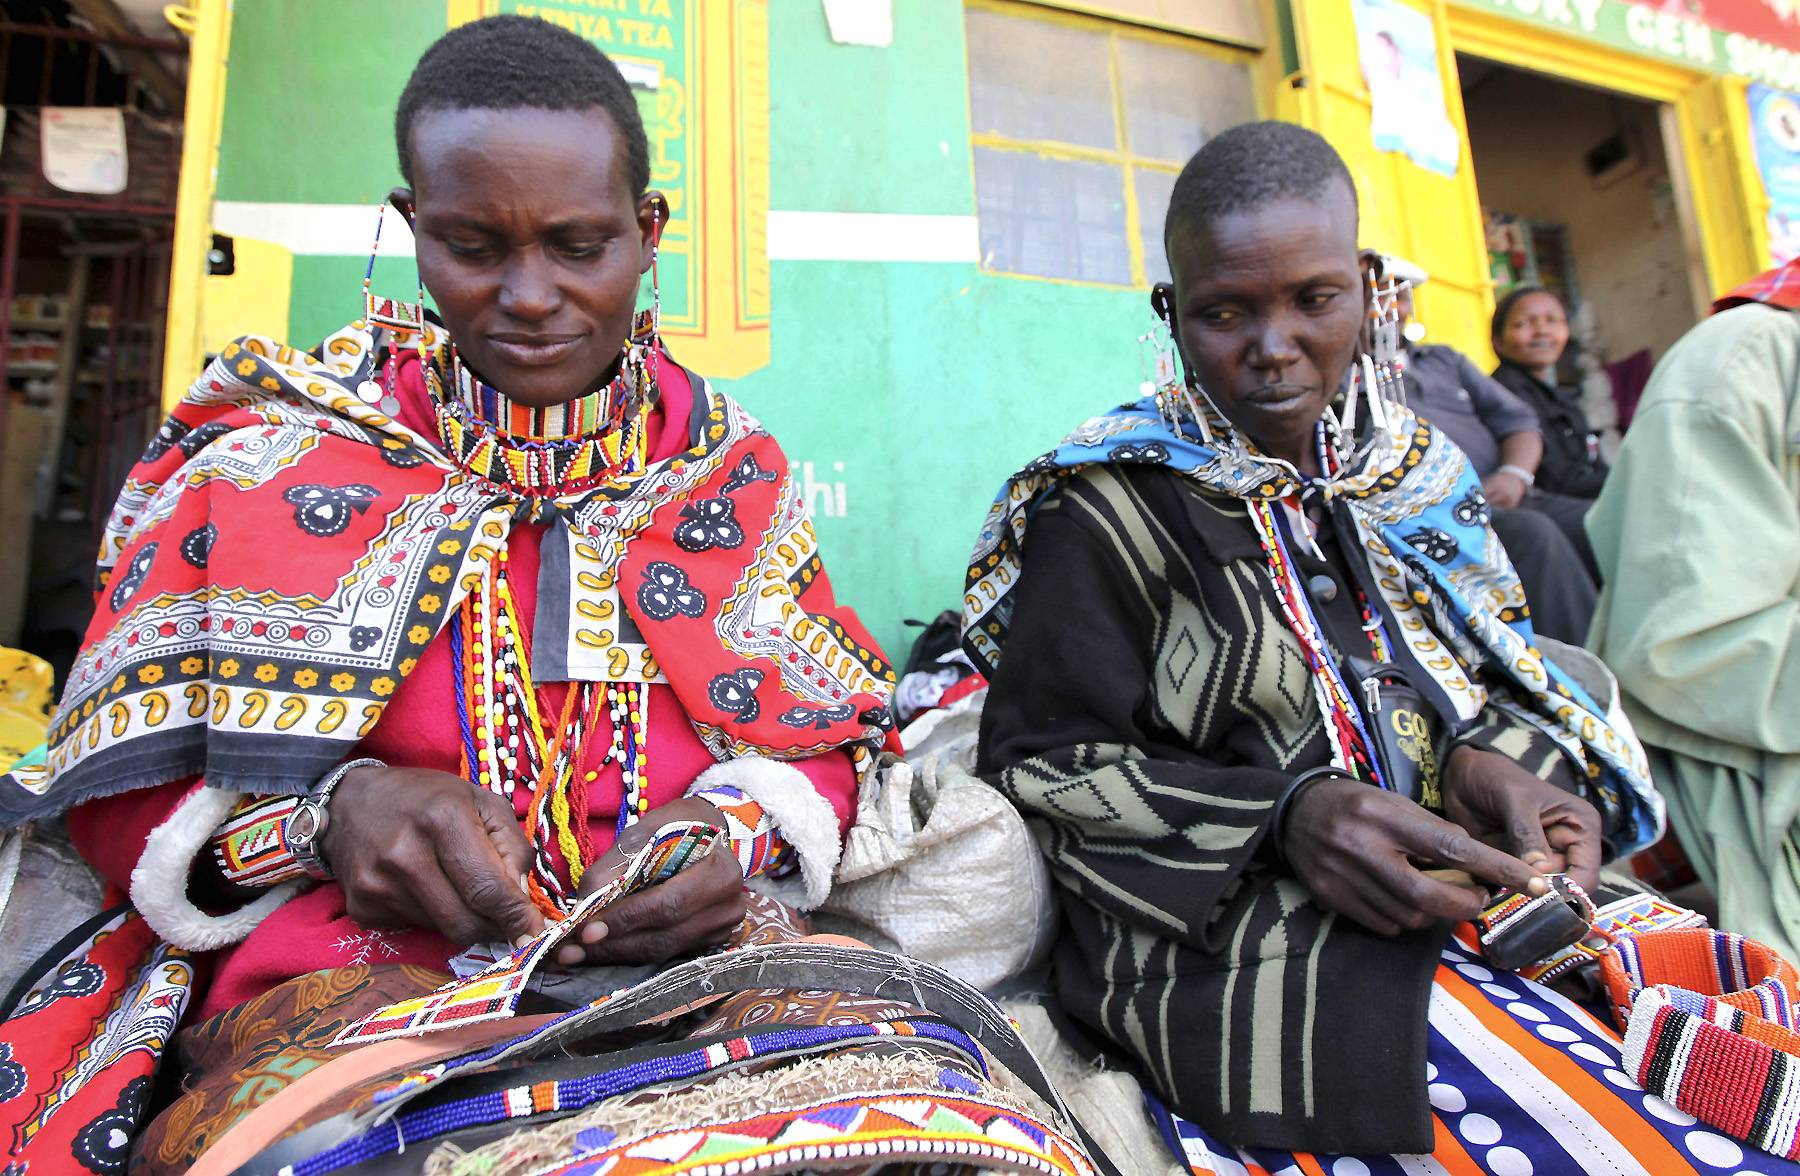 Maasai Elders Aim to Reclaim Their Brand - Largely located in Kenya and Tanzania, the African ethnic group is fed up with companies like Louis Vuitton and Land Rover using their popular name and image to sell products. Maasai elder Isaac ole Tialolo and several companies have teamed up to combat this complicated matter.(Photo: REUTERS/Thomas Mukoya)